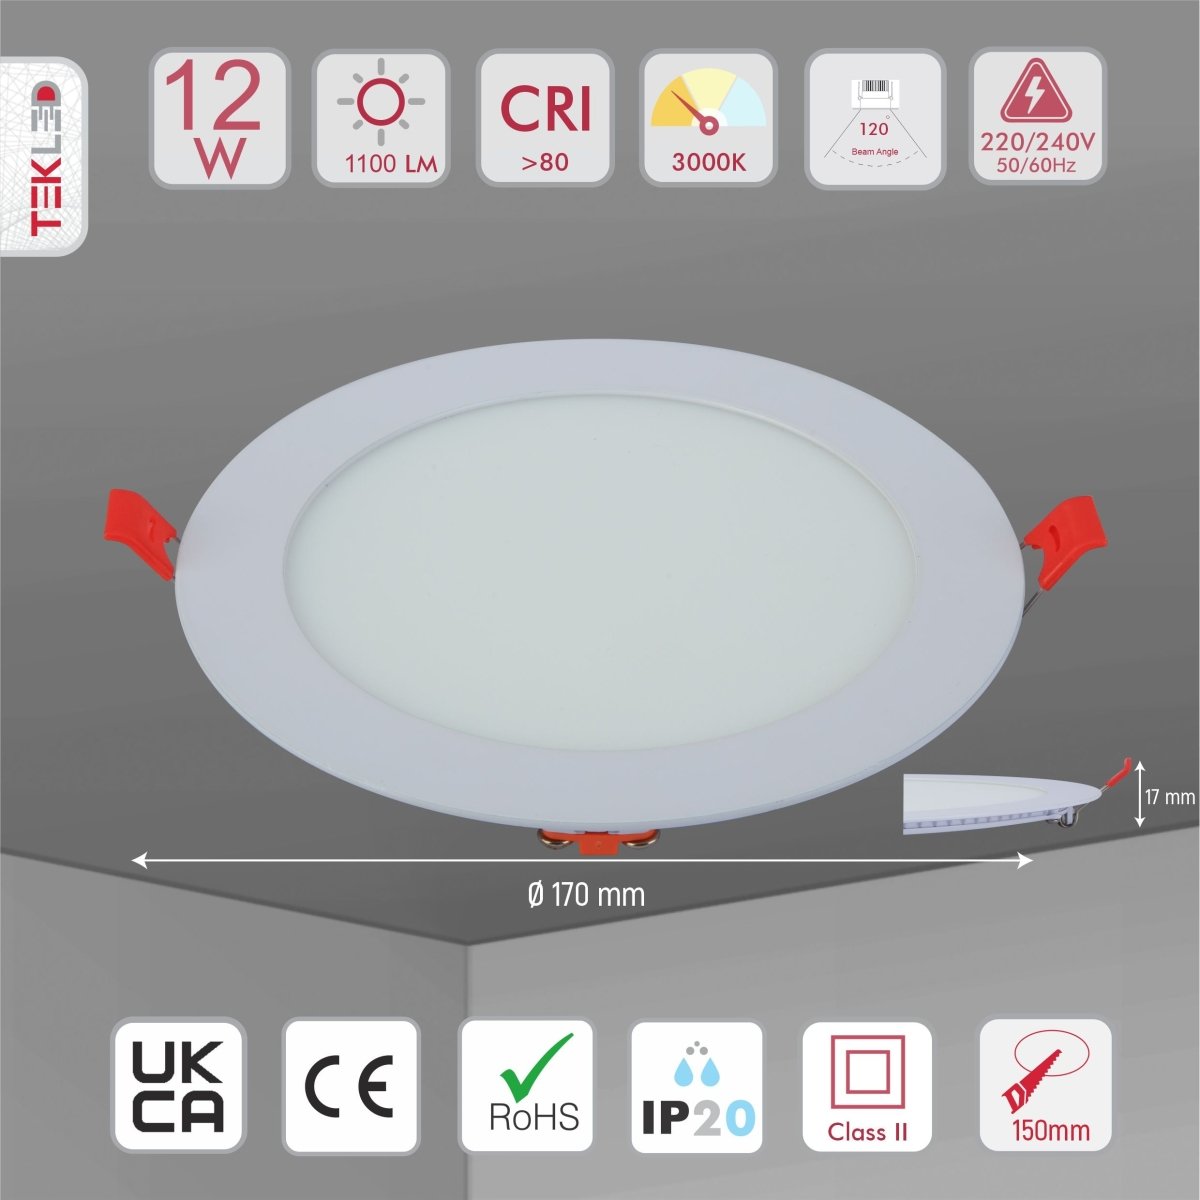 Product dimensions of downlight led round slim panel light 12w 3000k warm white d170mm